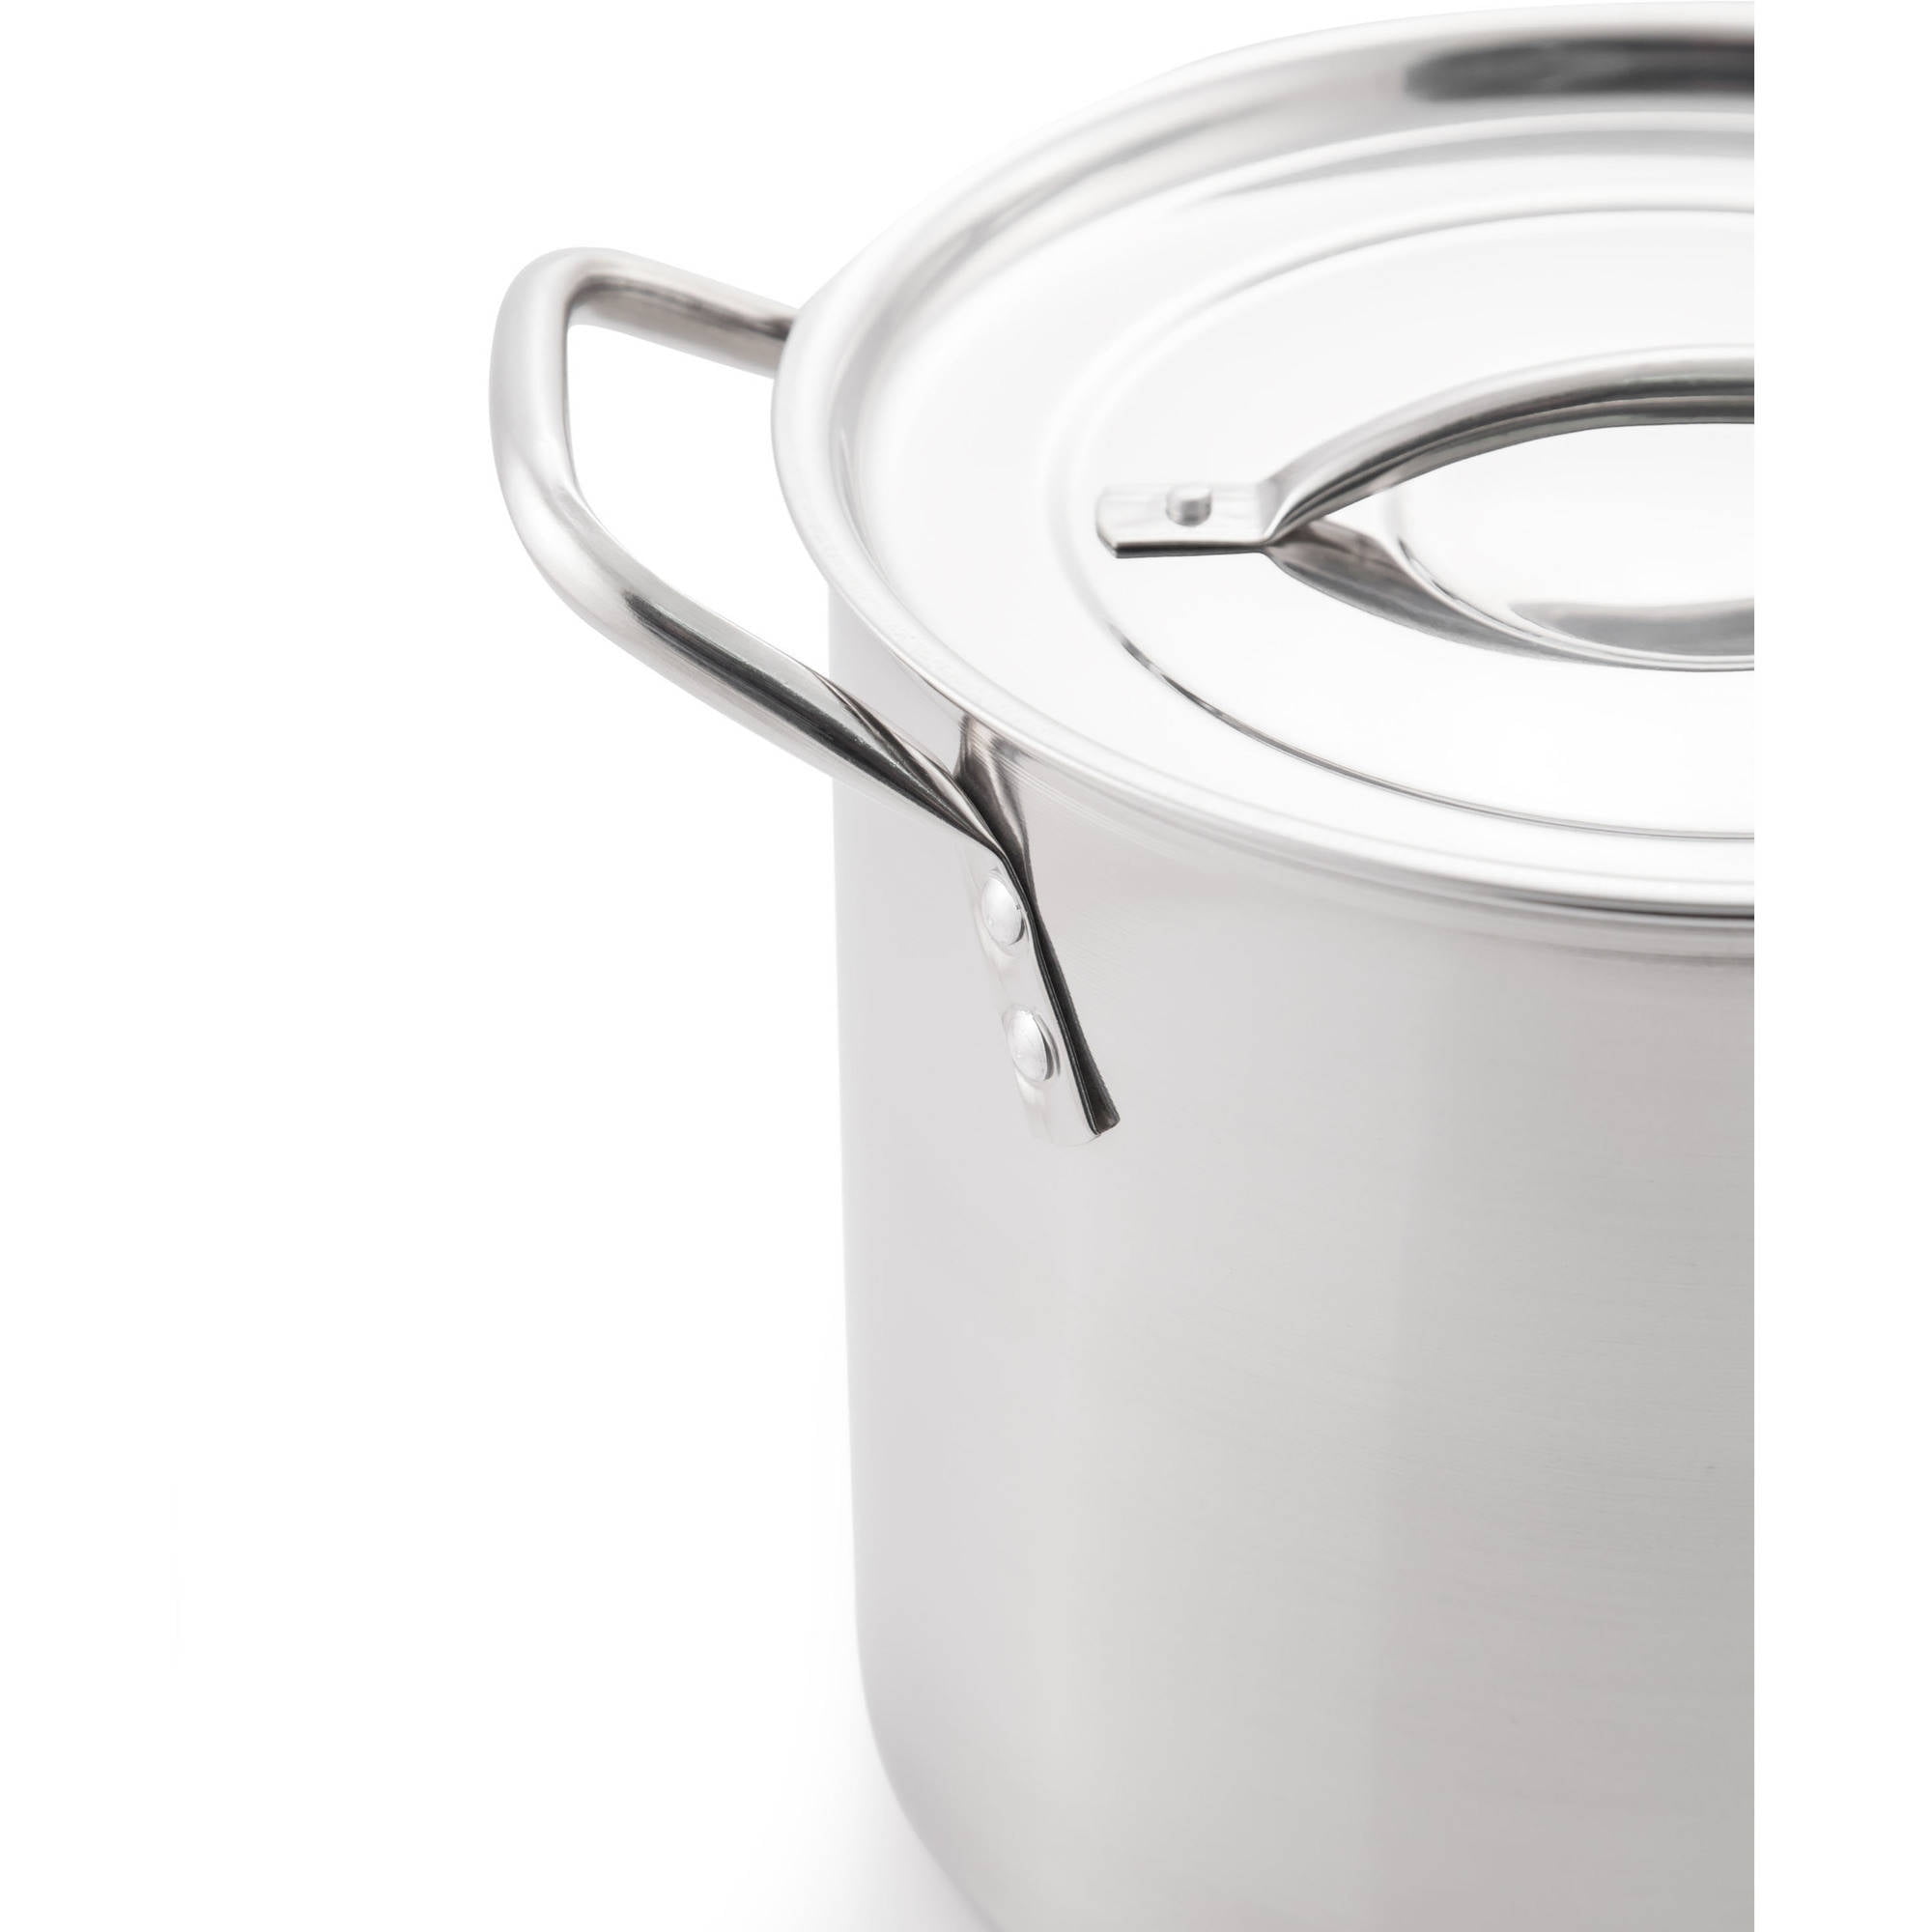 Millvado Stock Pot, 6 Quart Stainless Steel Pot, StockPot With